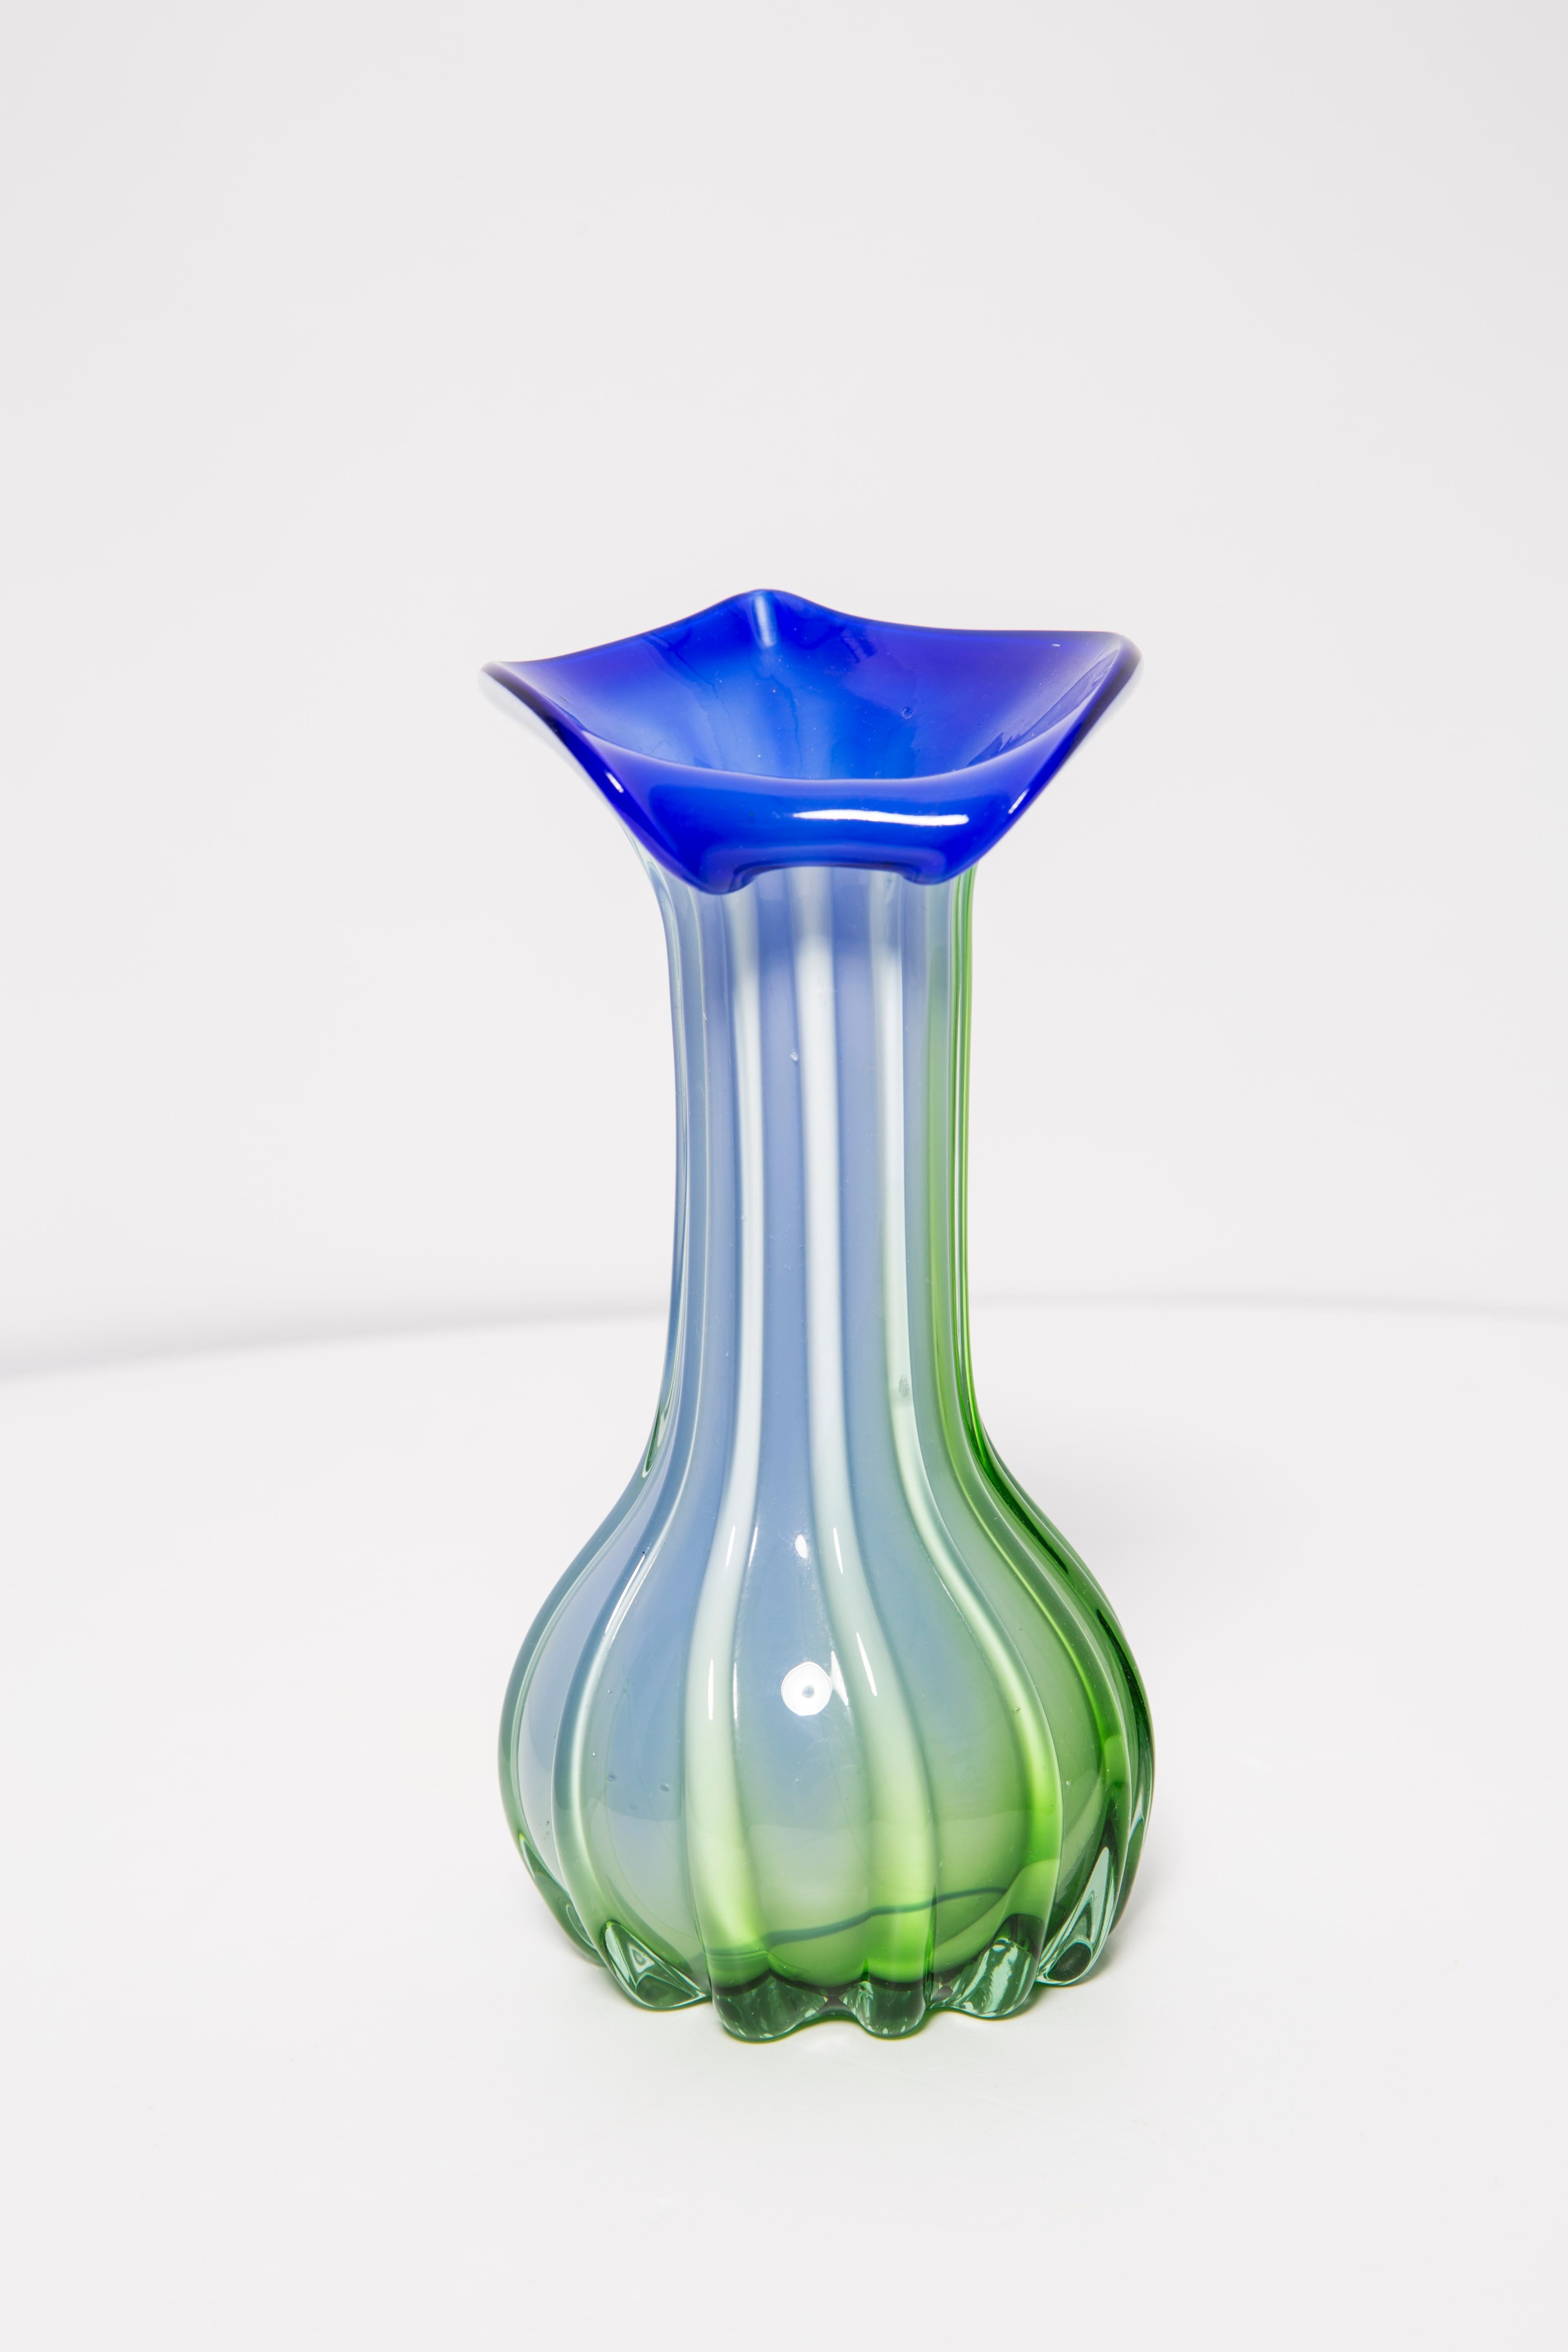 Glass Midcentury Vintage Green and Blue Murano Vase, Italy, 1960s For Sale